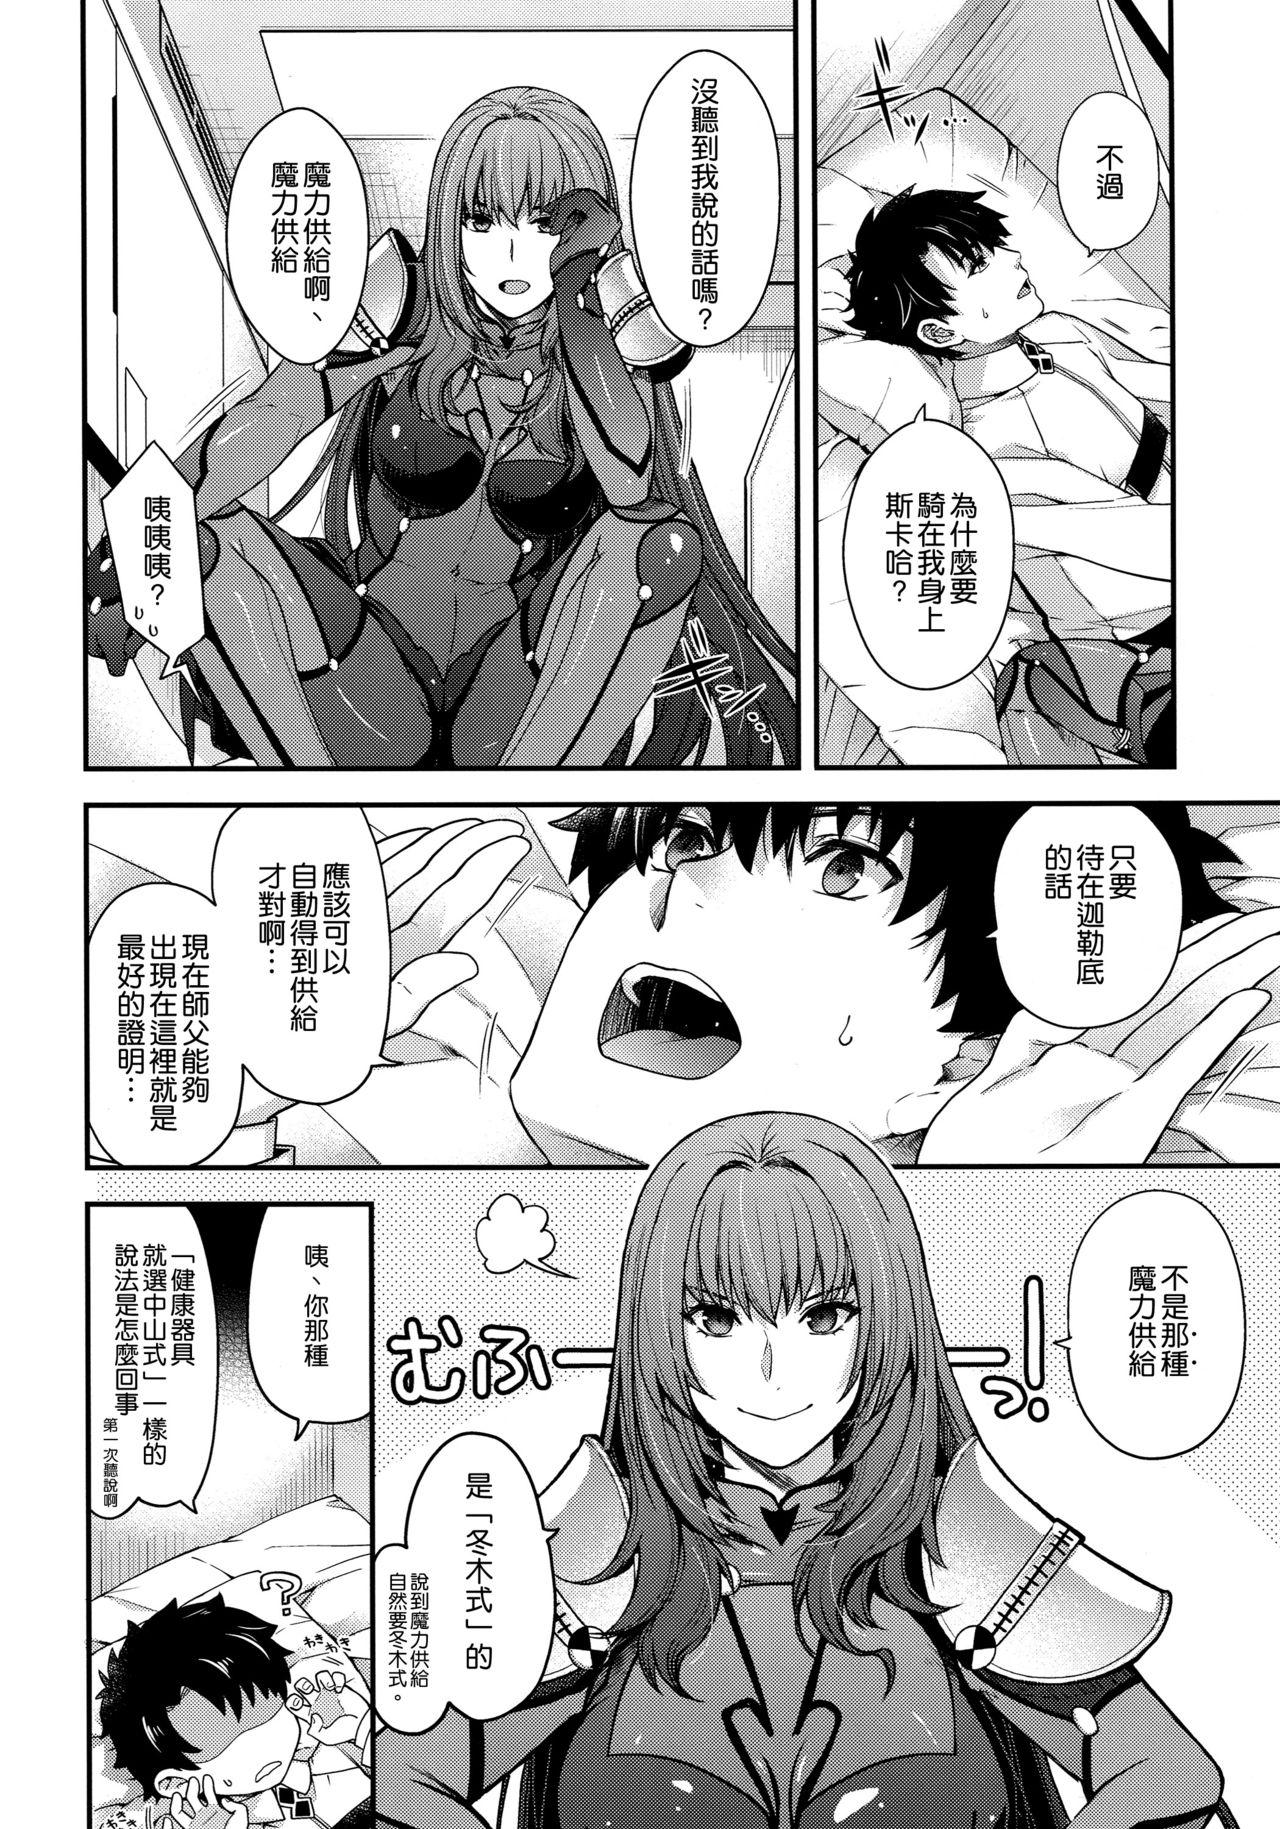 Girls Getting Fucked parthas - Fate grand order Studs - Page 4